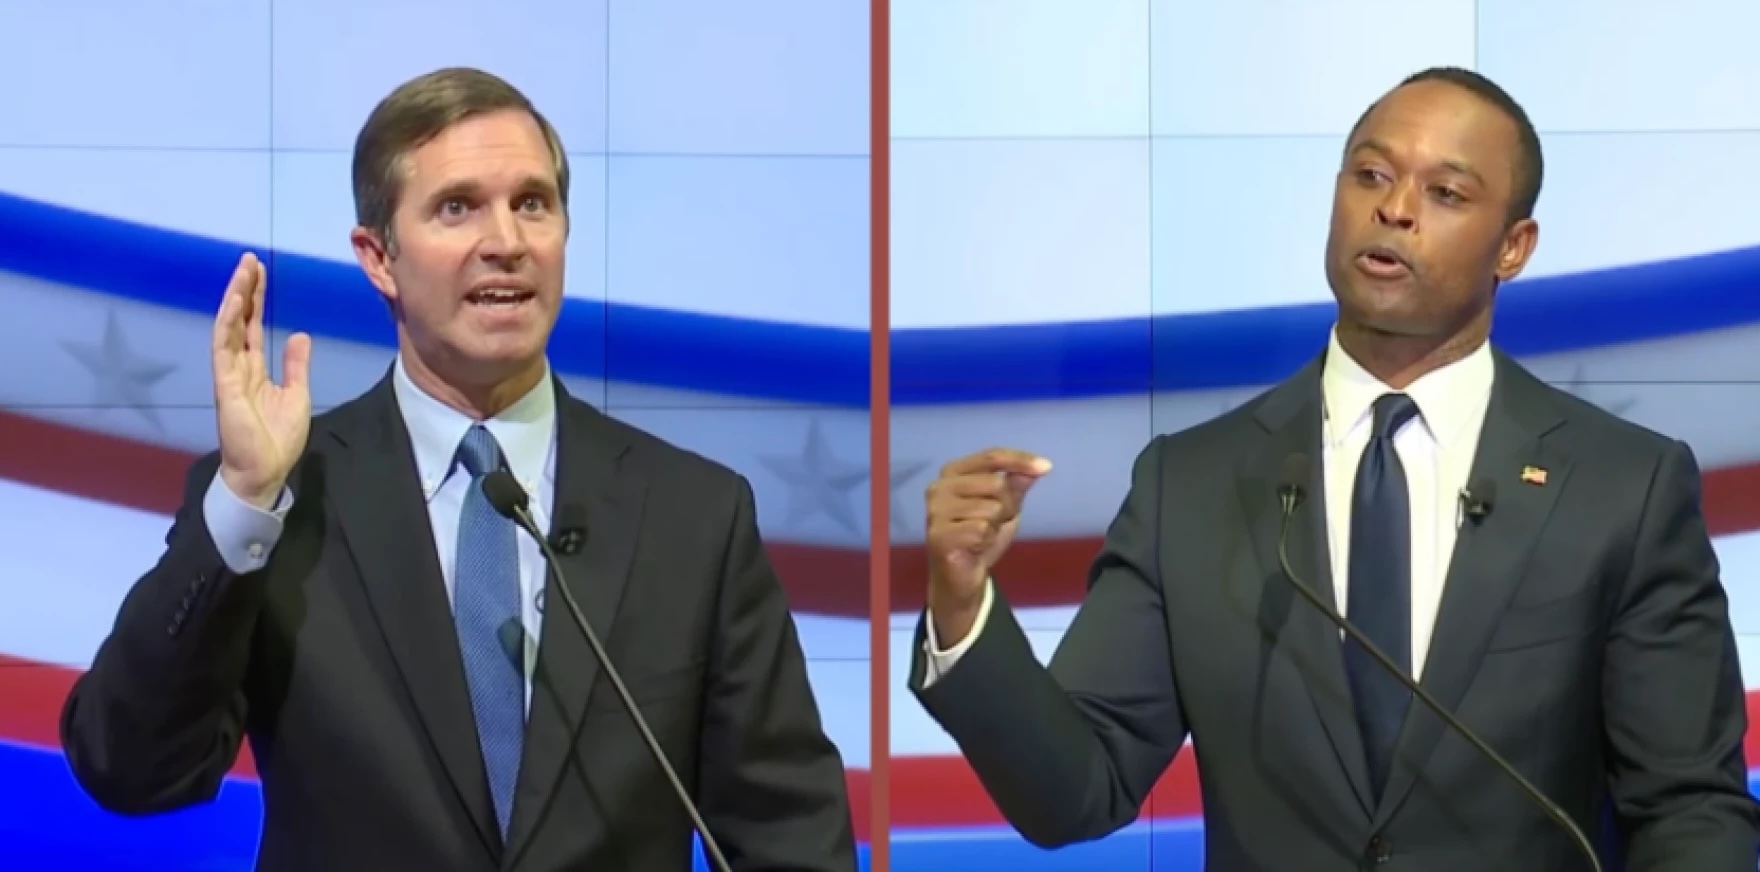 Beshear and Cameron on debate stage